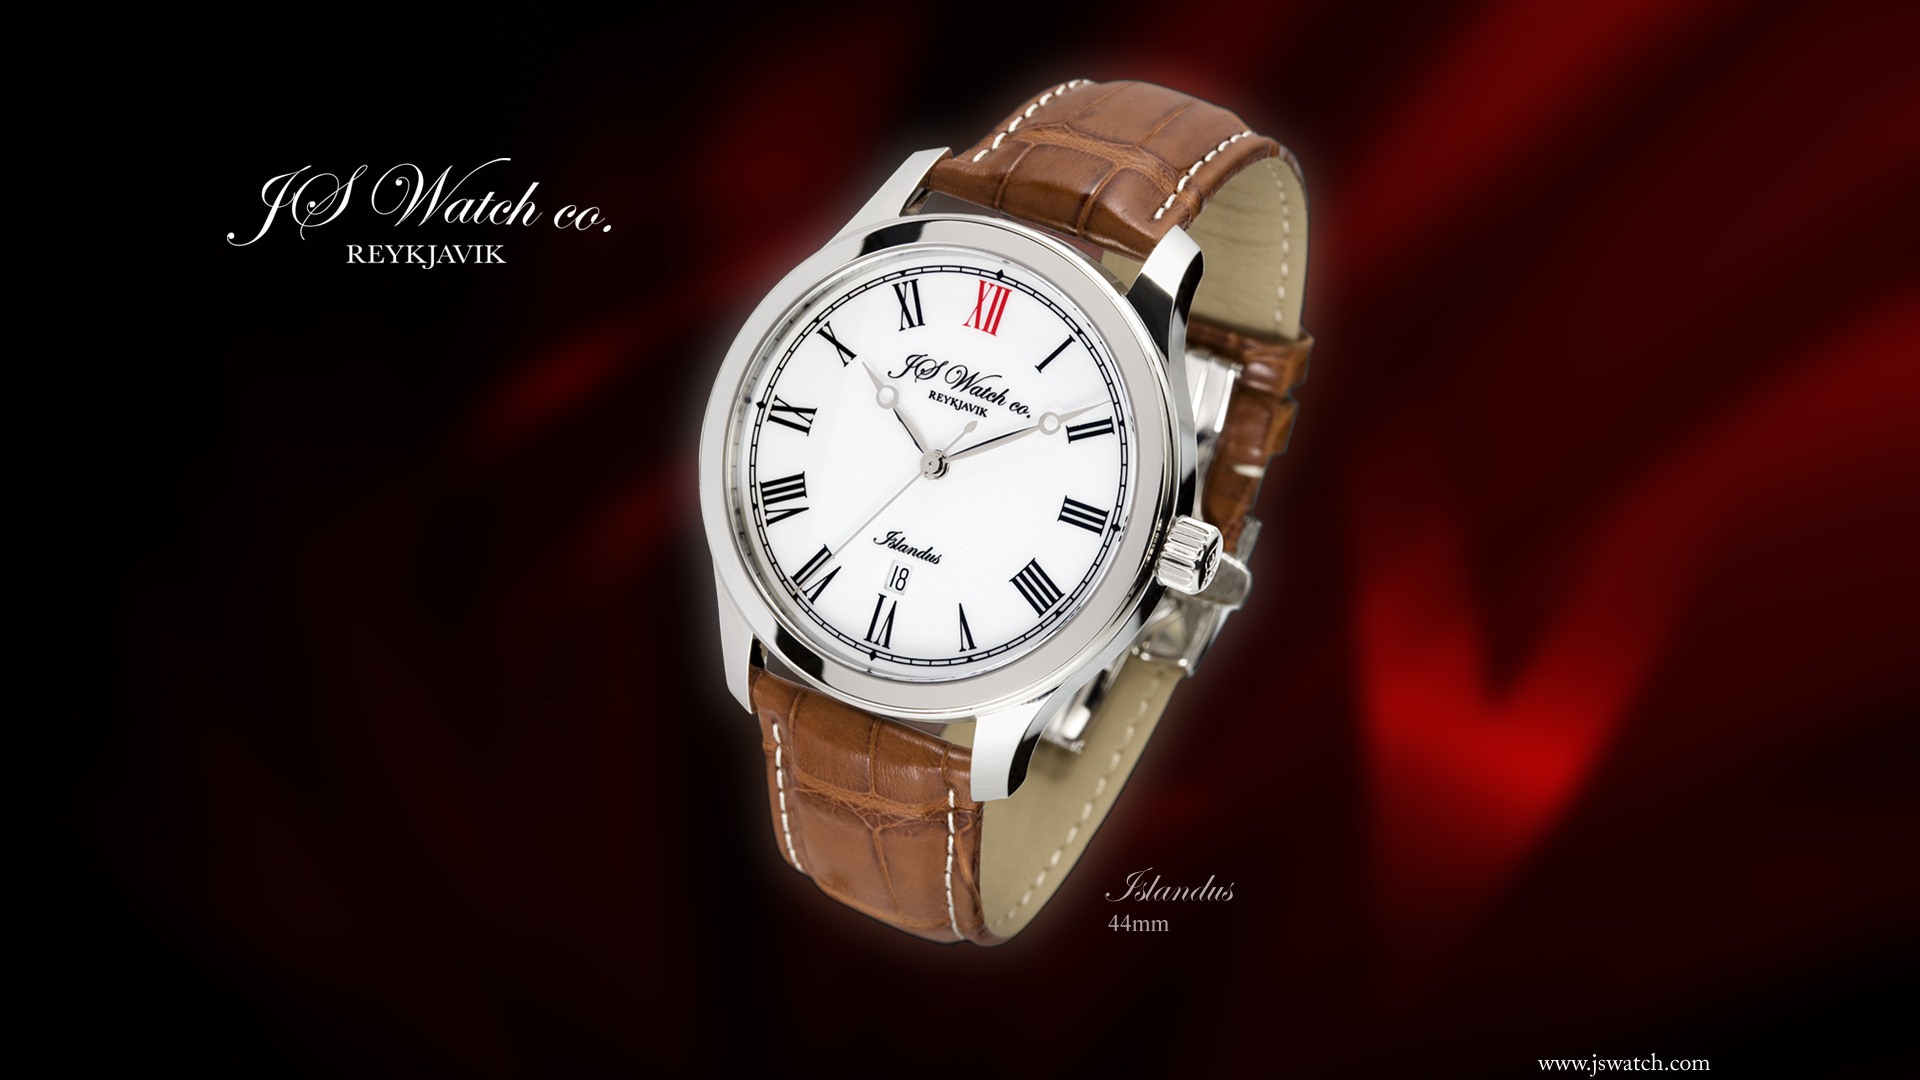 World famous watches wallpapers (2) #1 - 1920x1080